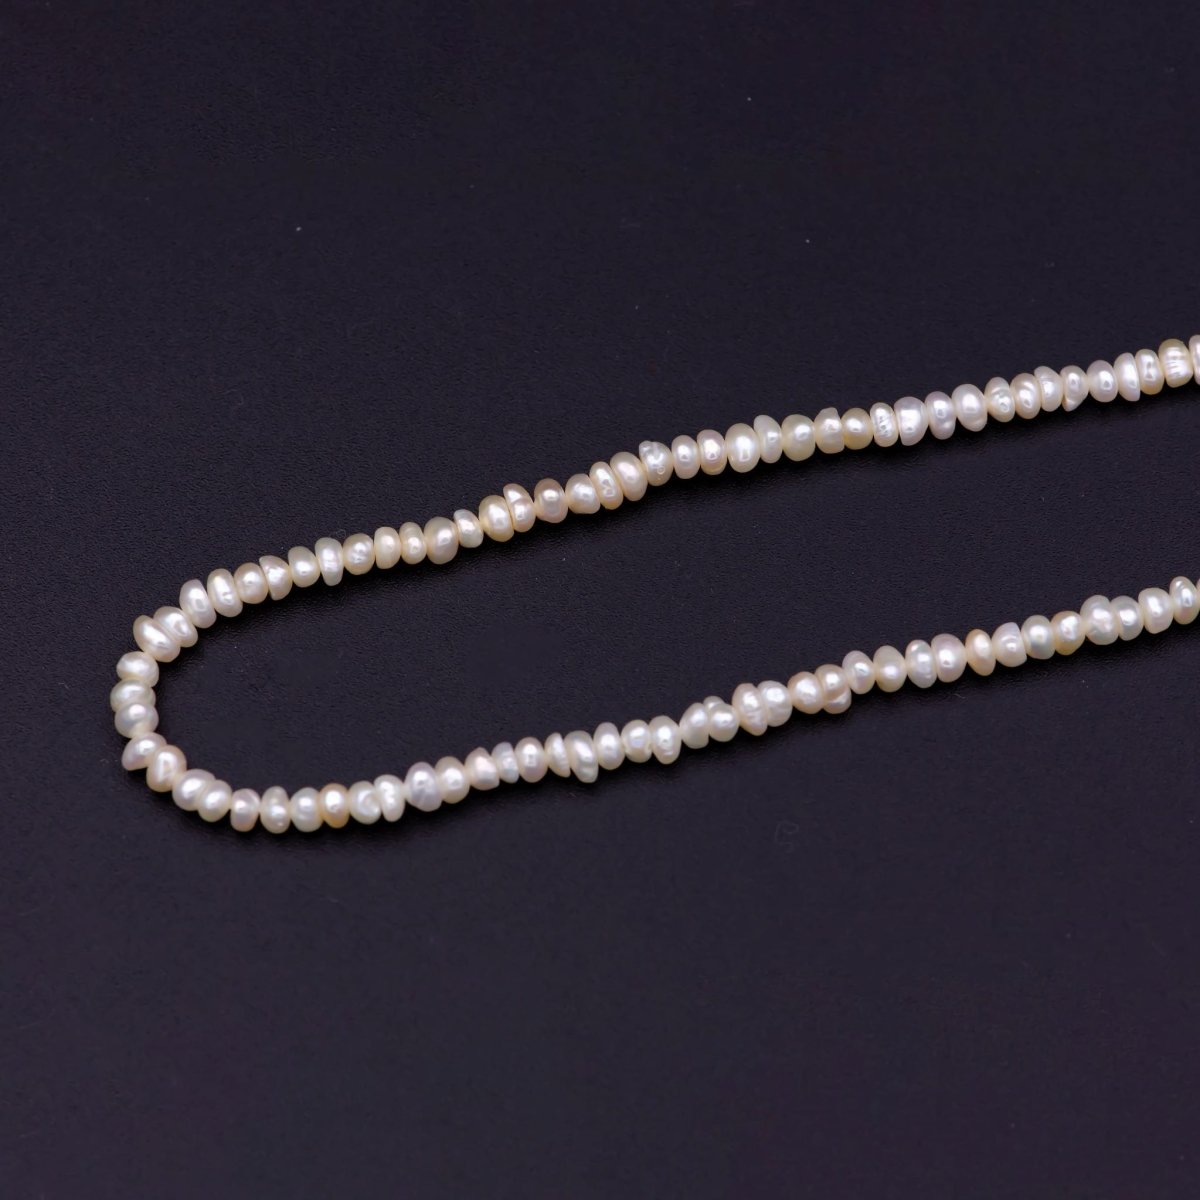 2.9mm-3.8mm white potato freshwater pearls, seed pearl, small size pearl, genuine pearl bead strand supply for Jewelry Making | WA-570 Clearance Pricing - DLUXCA